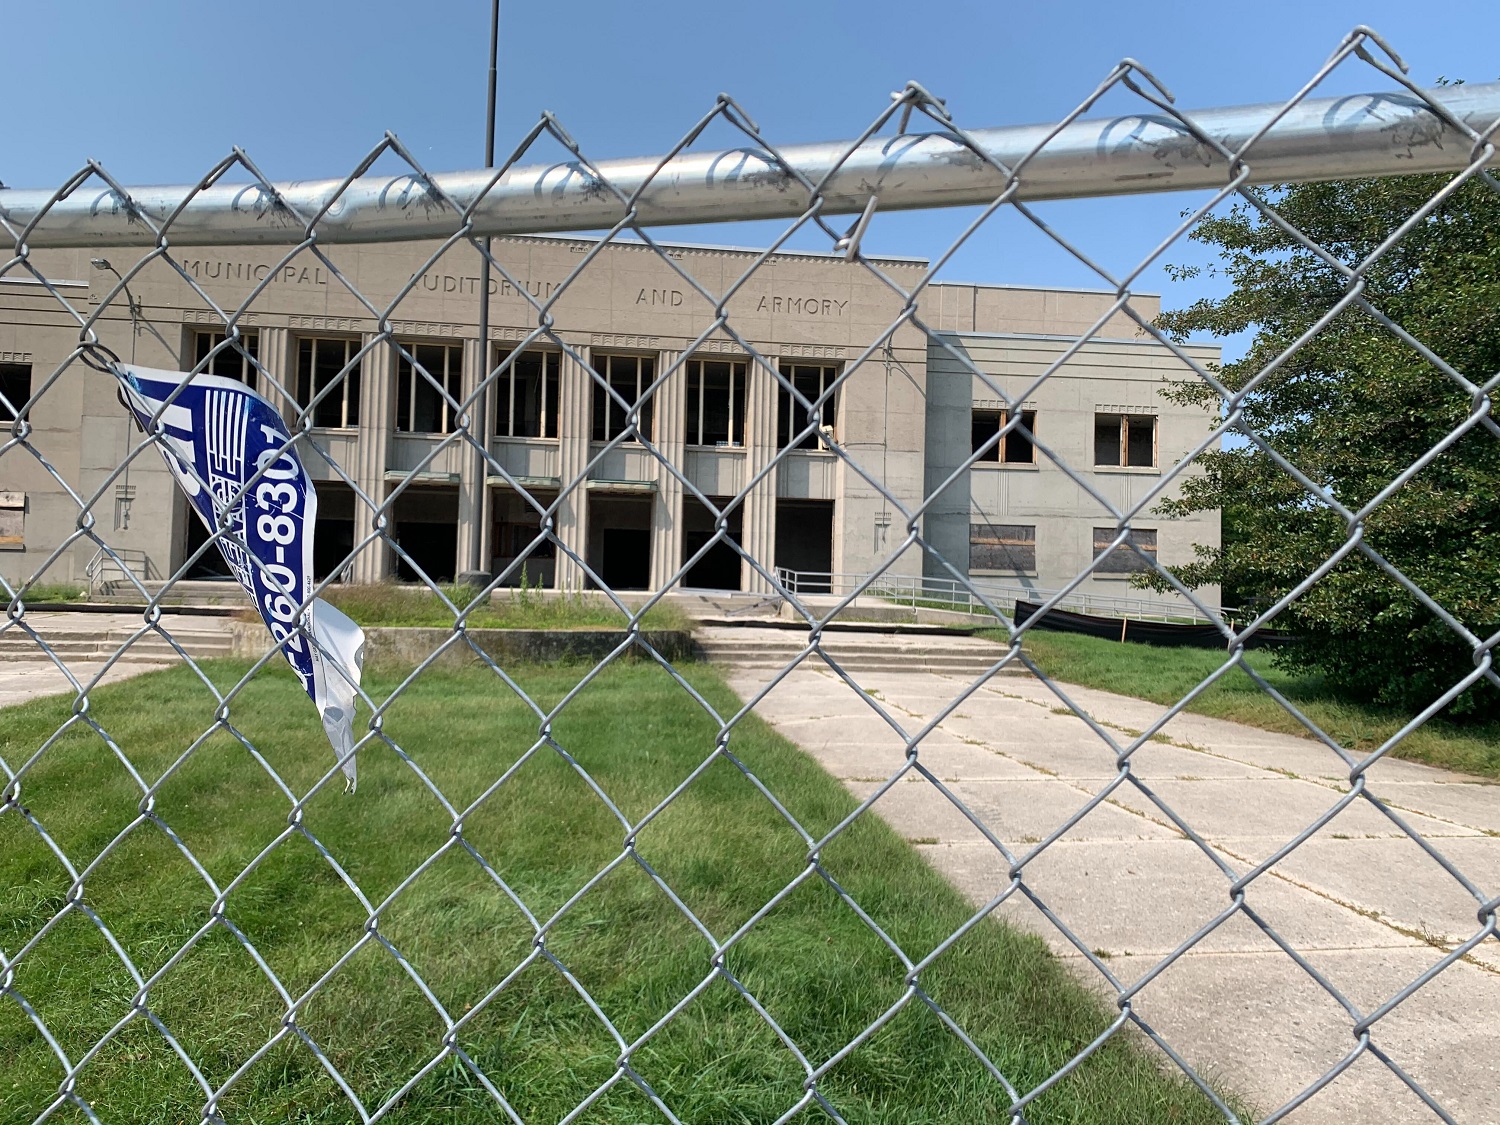 The view of the Armory taken from the Sheboygan Yacht Club as the early stages of demolition continue on Aug. 26, 2020. (Megan Hart/WPR)